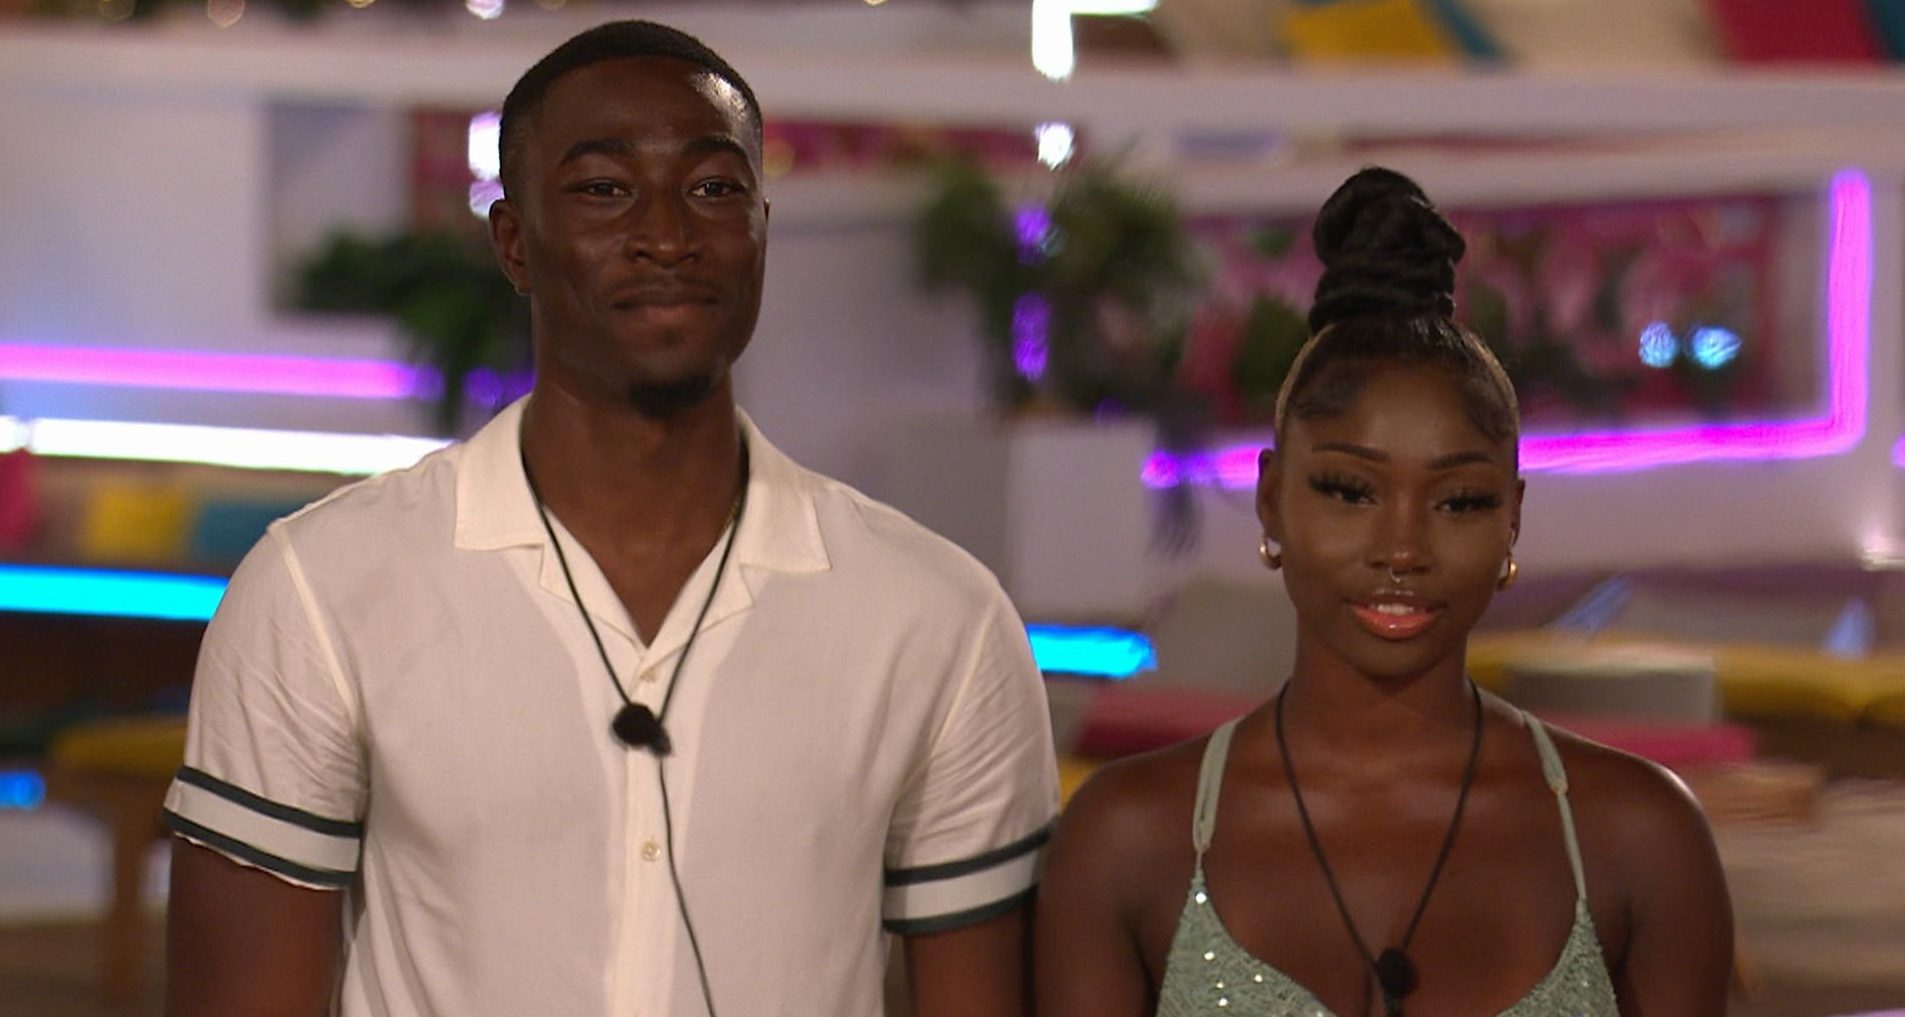 Love Island’s Indiyah Polack calls out Deji Adeniyi over unaired kisses claim: ‘Stop the cap!’